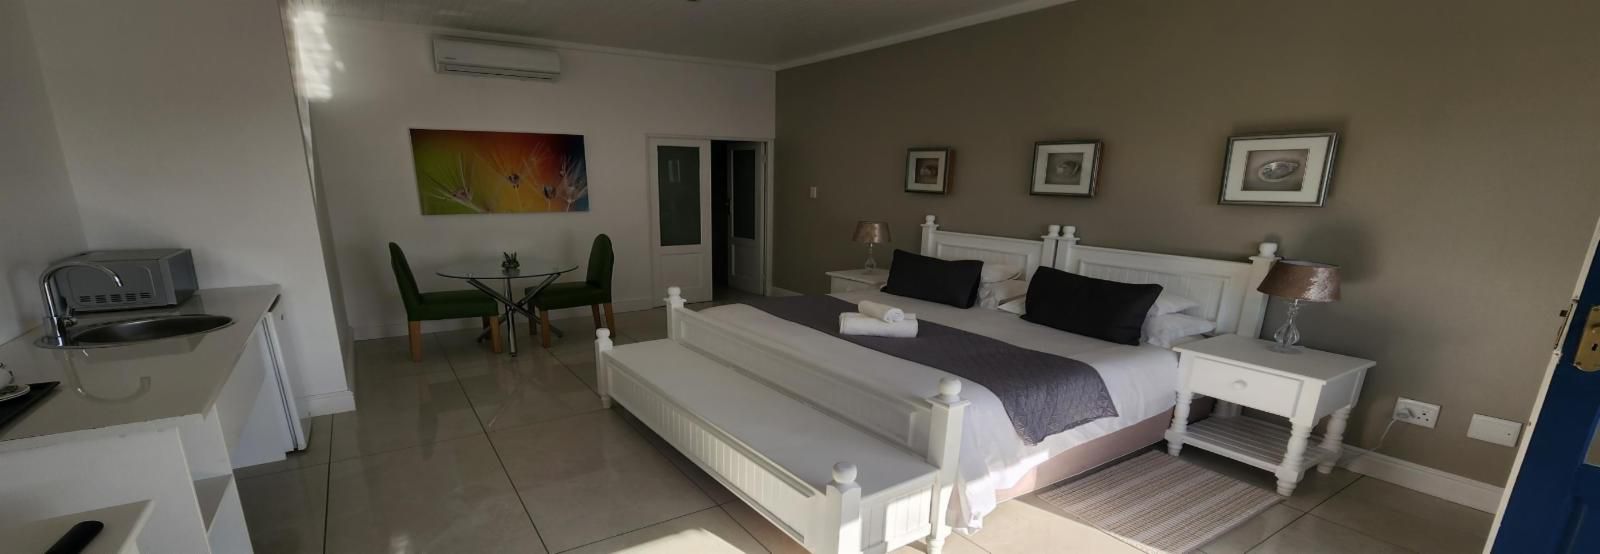 Paternoster Lodge Paternoster Western Cape South Africa Unsaturated, Bedroom